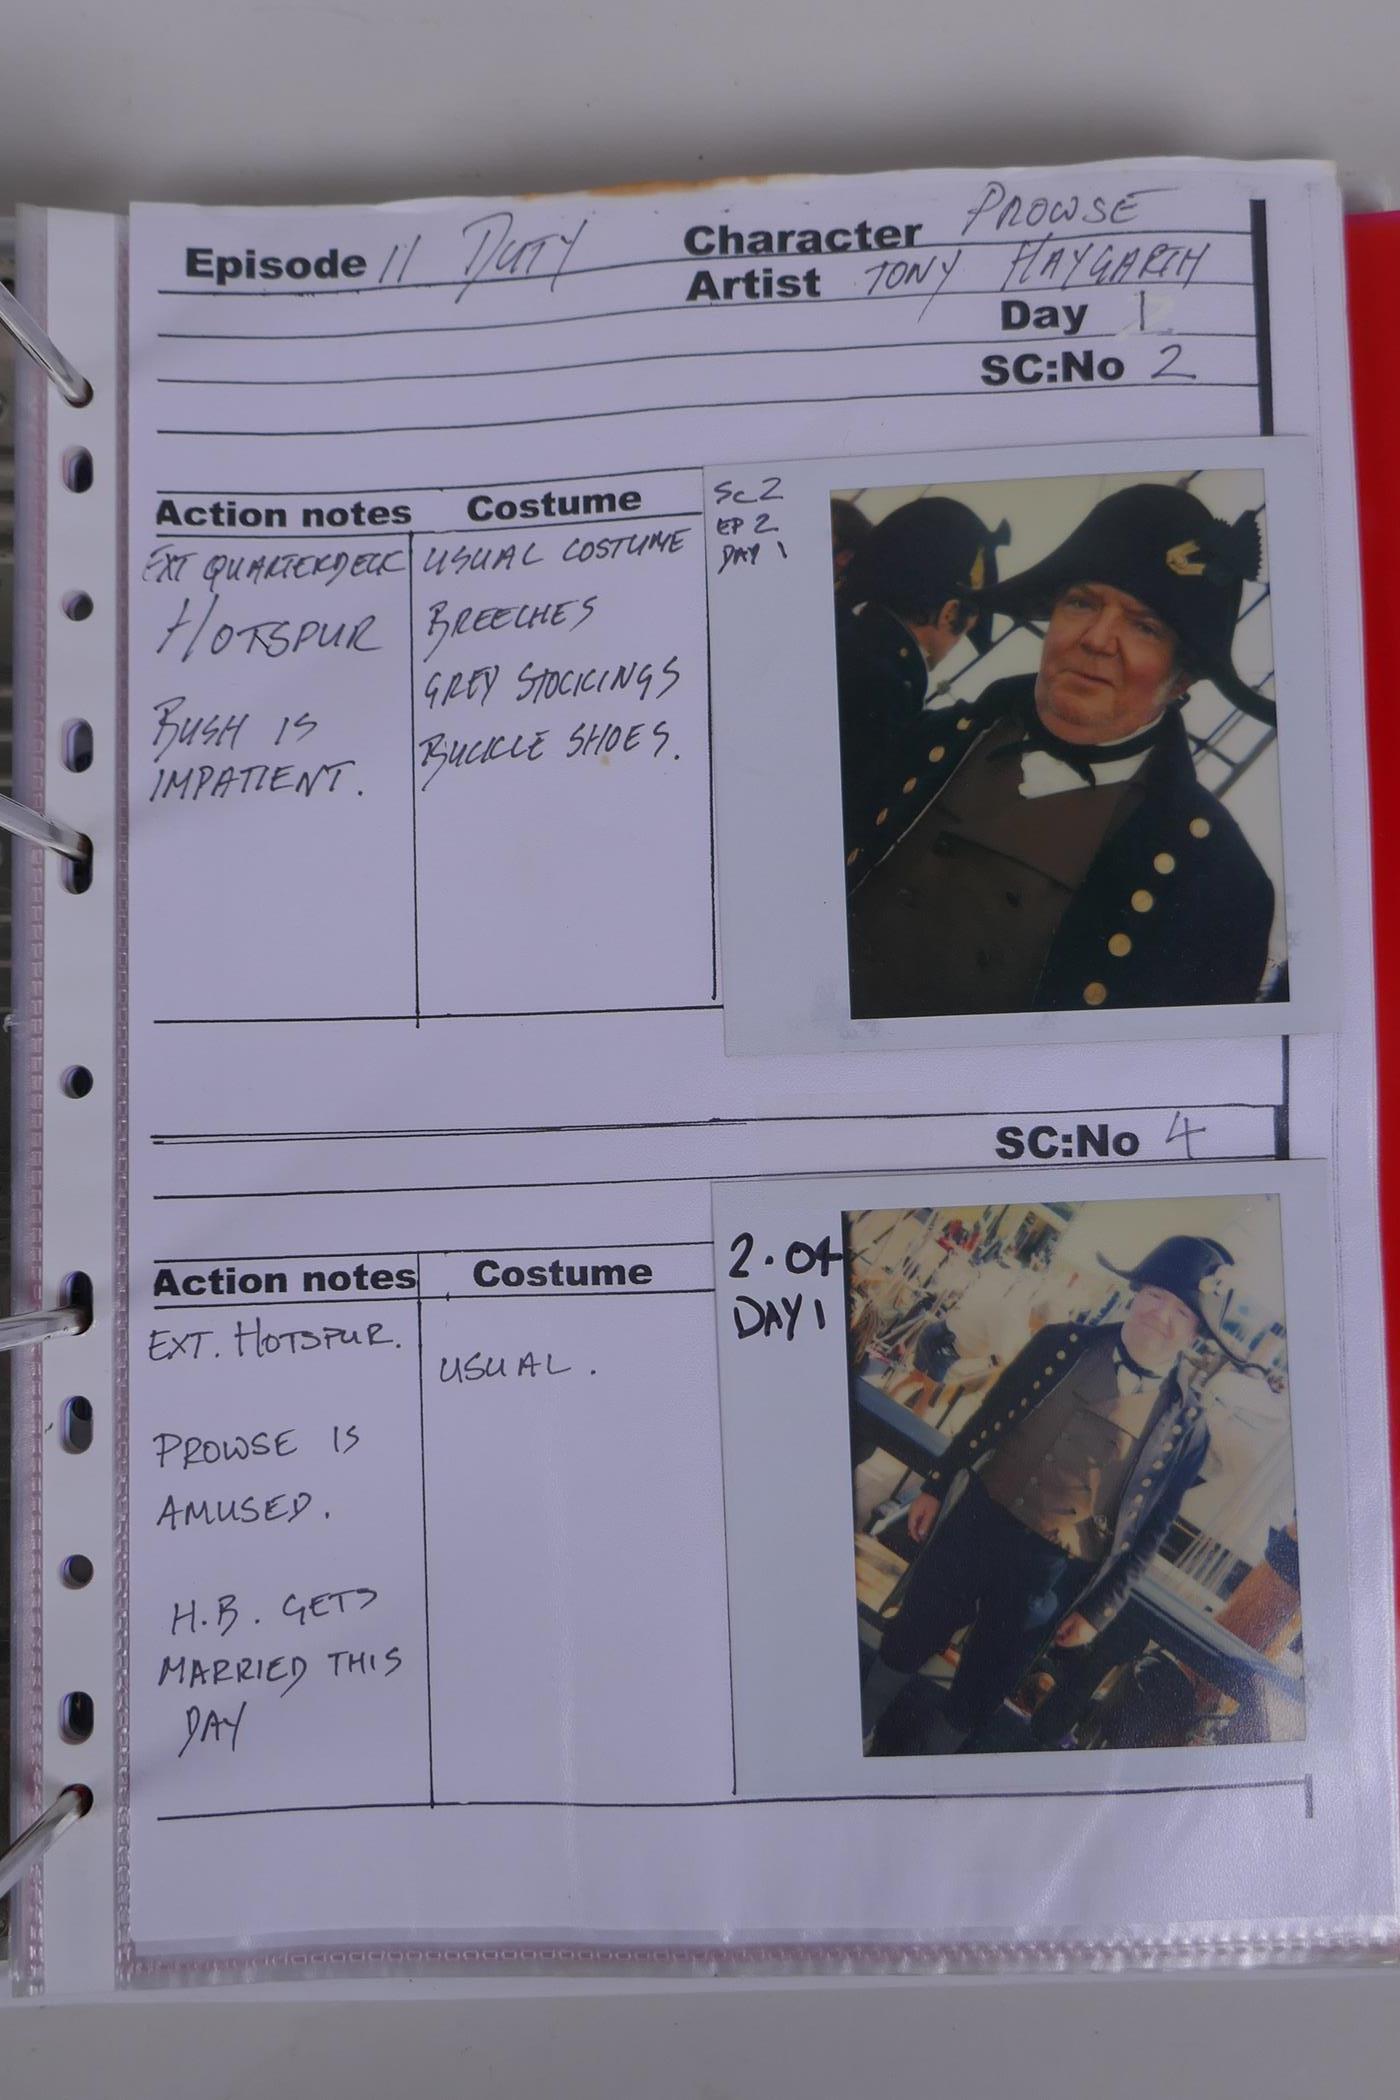 A Meridian broadcasting 'production book' for the TV series Hornblower, episode 2, Duty, - Image 5 of 7